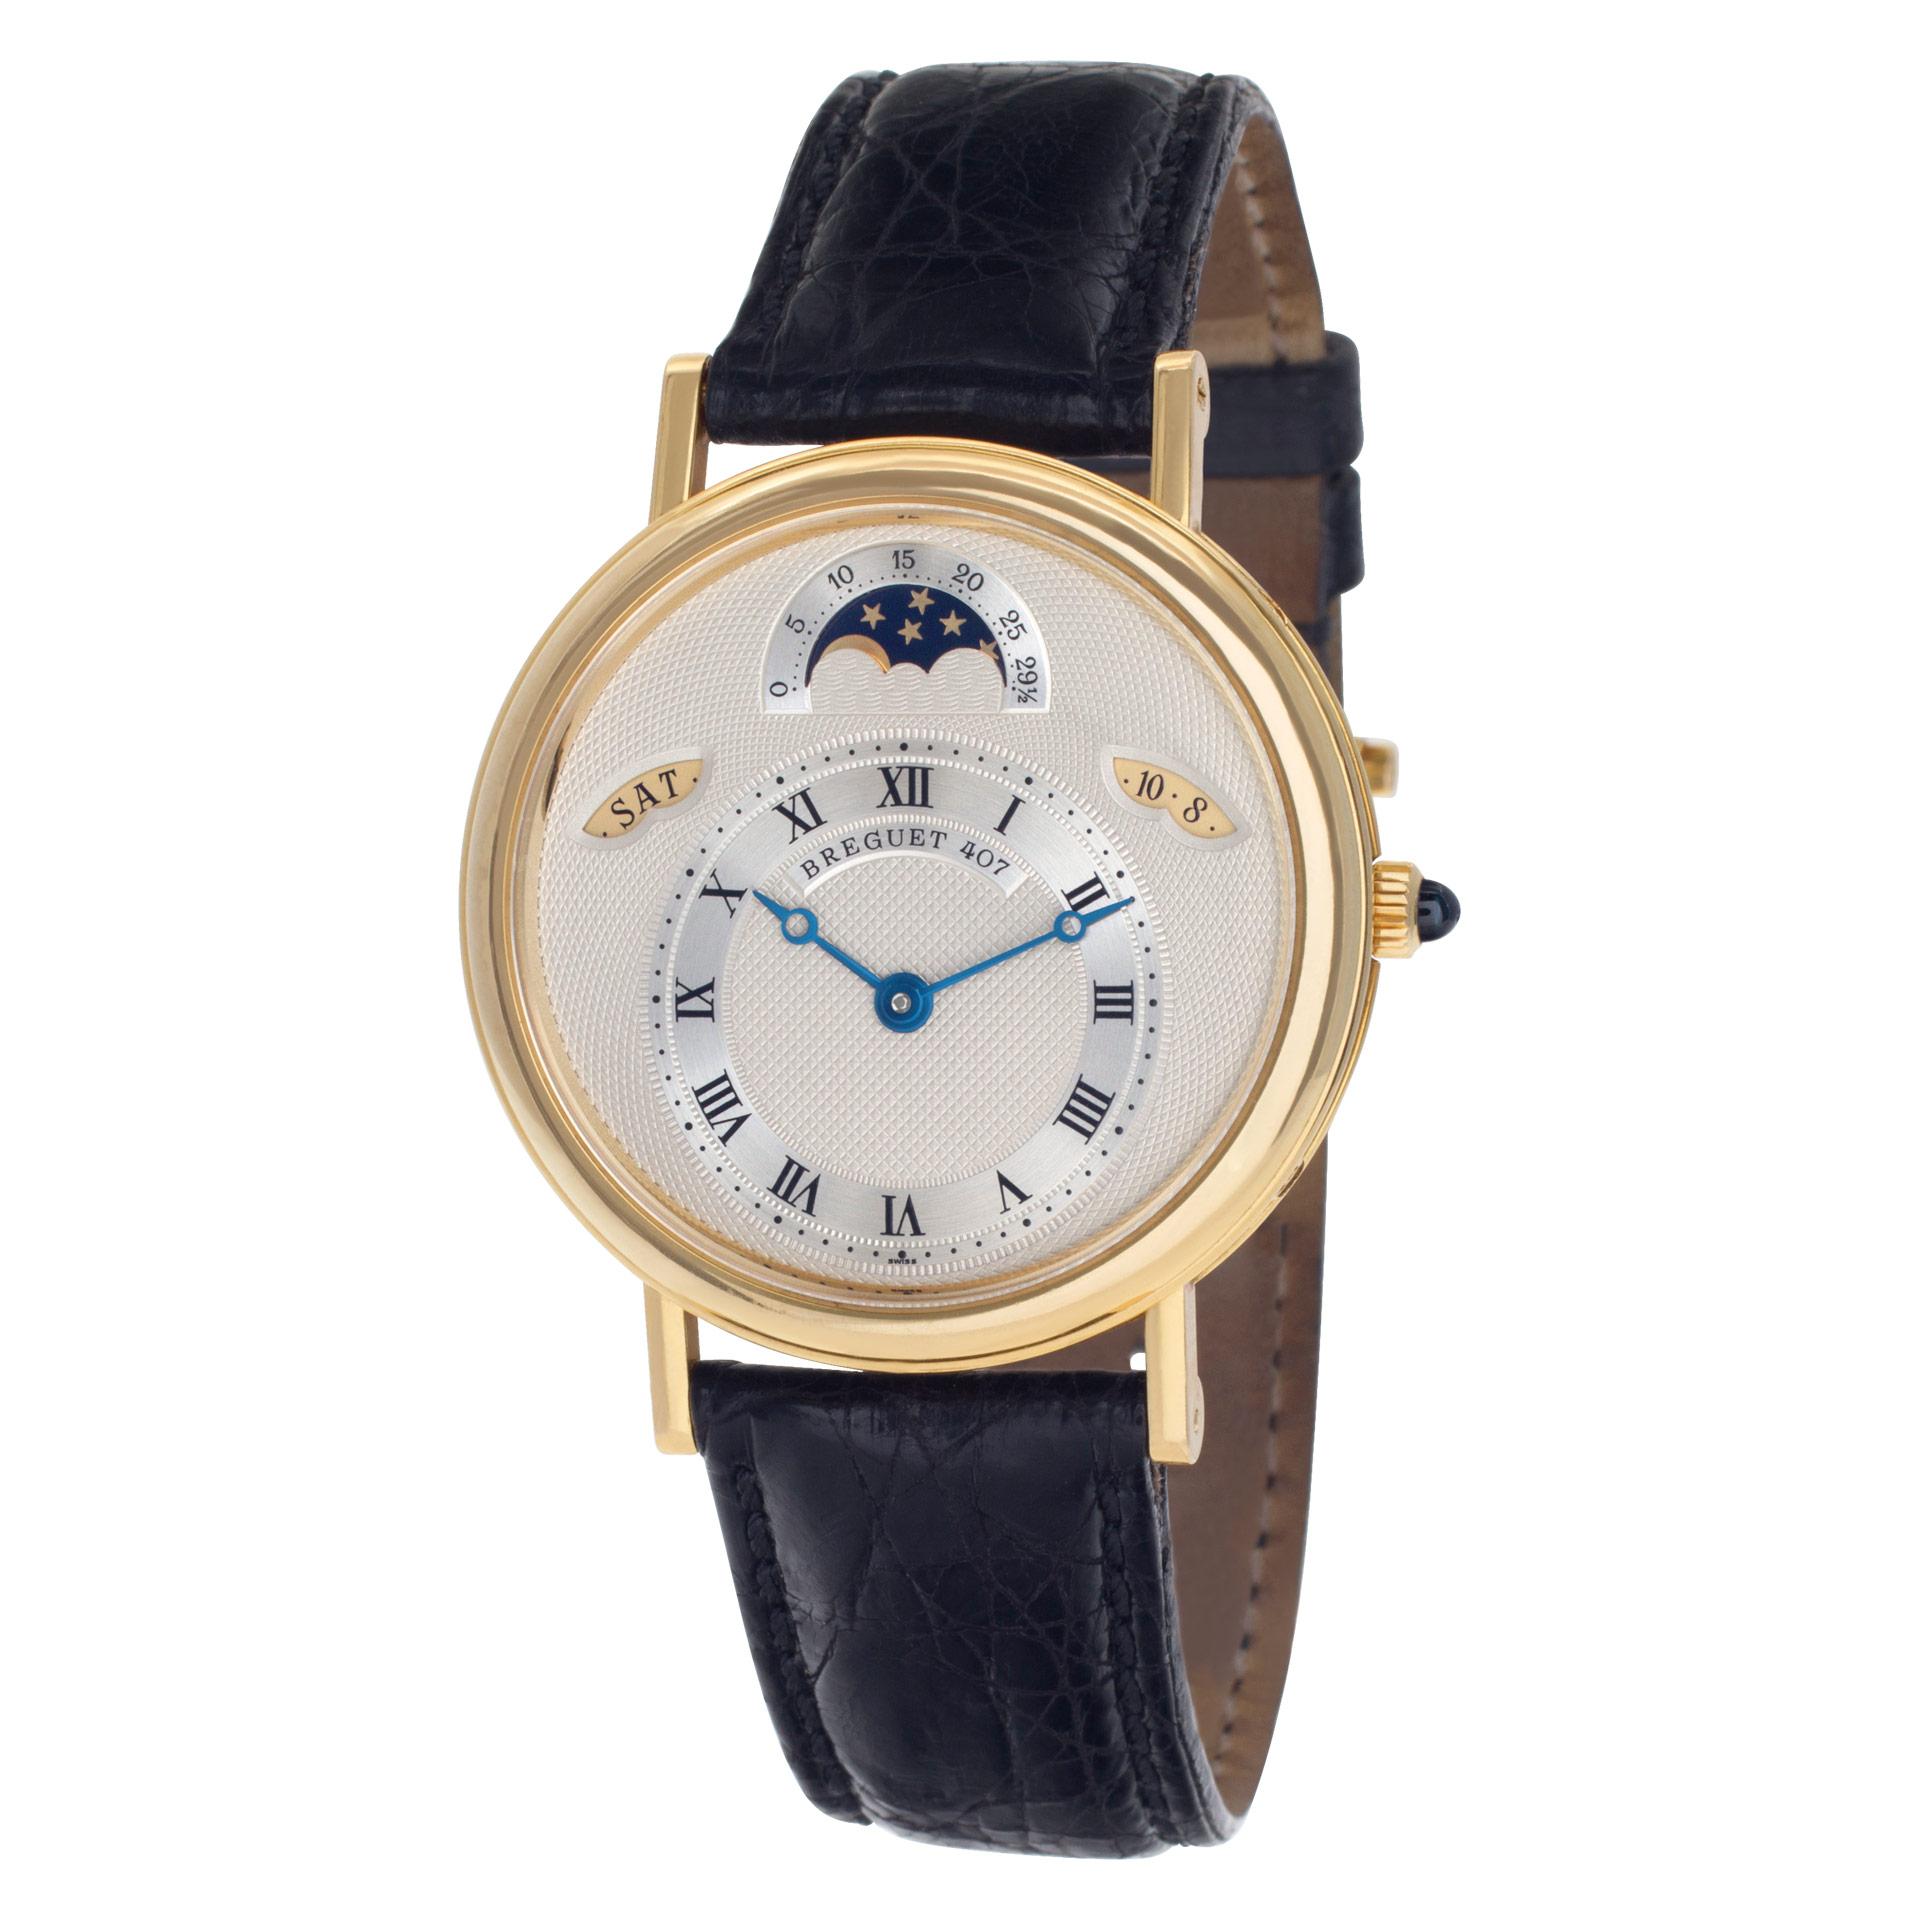 Breguet Day Date Moonphase in 18k on a crocodile strap with 18k tang buckle. Auto w/ date, day and moonphase. 36mm case size. Ref 3337ba/1e/986. Circa 1990s. Fine Pre-owned Breguet Watch.  Certified preowned Dress Breguet Quantième 3337ba/1e/986